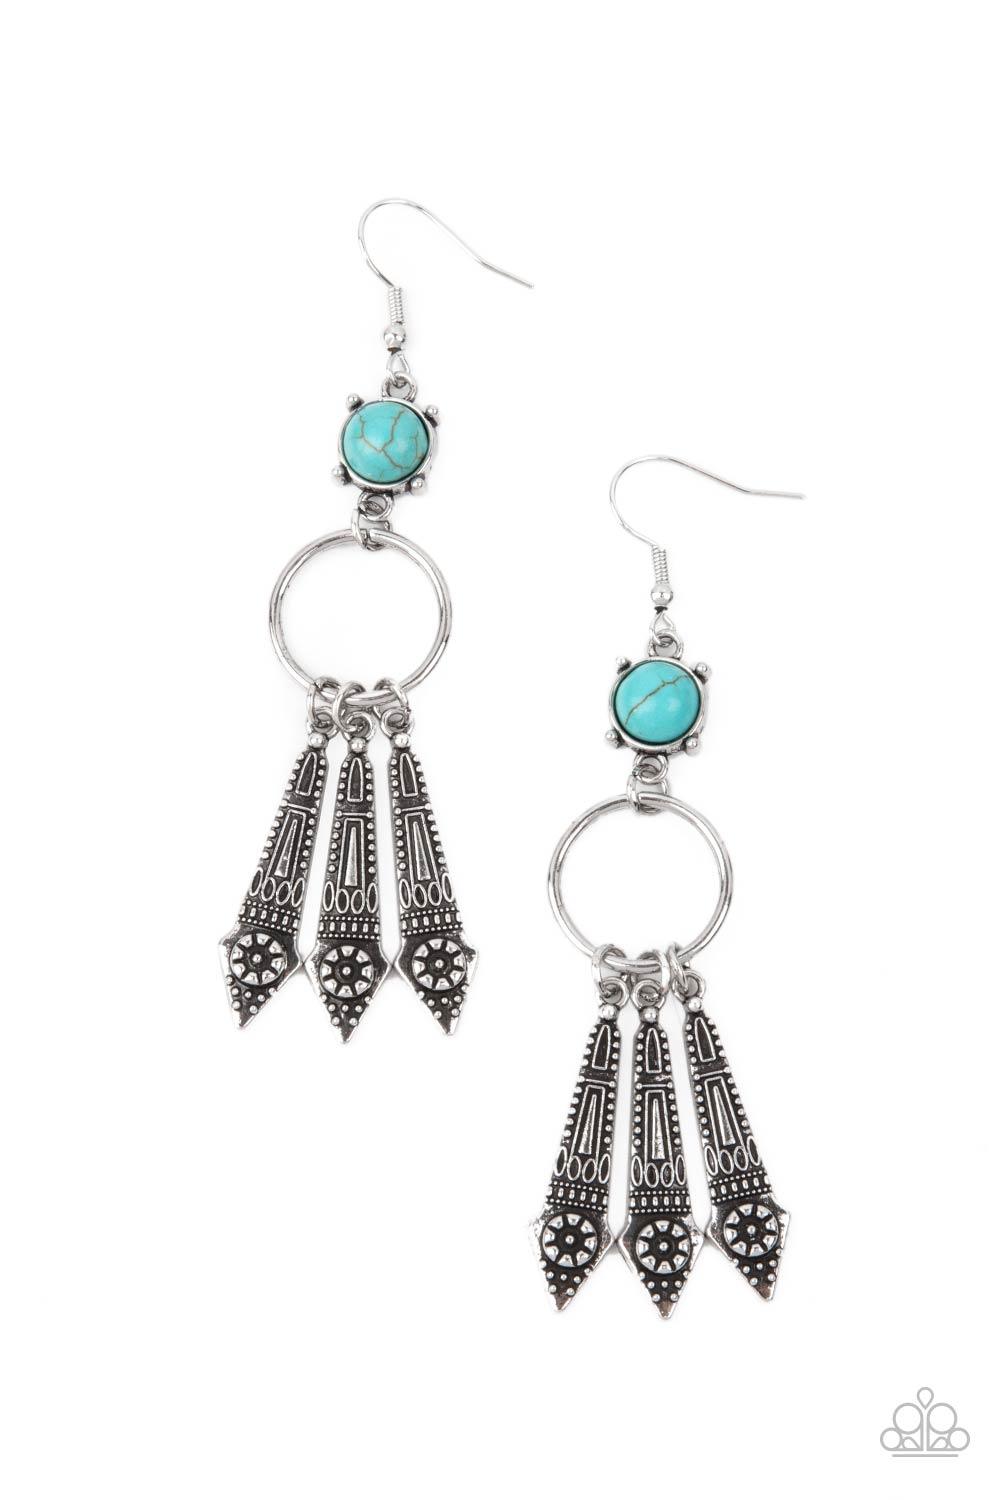 Paparazzi Accessories Prana Paradise - Blue Embellished with dainty flowers, flared silver bars glide along the bottom of a dainty silver ring that attaches to a turquoise stone fitting, creating a whimsical lure. Earring attaches to a standard fishhook f